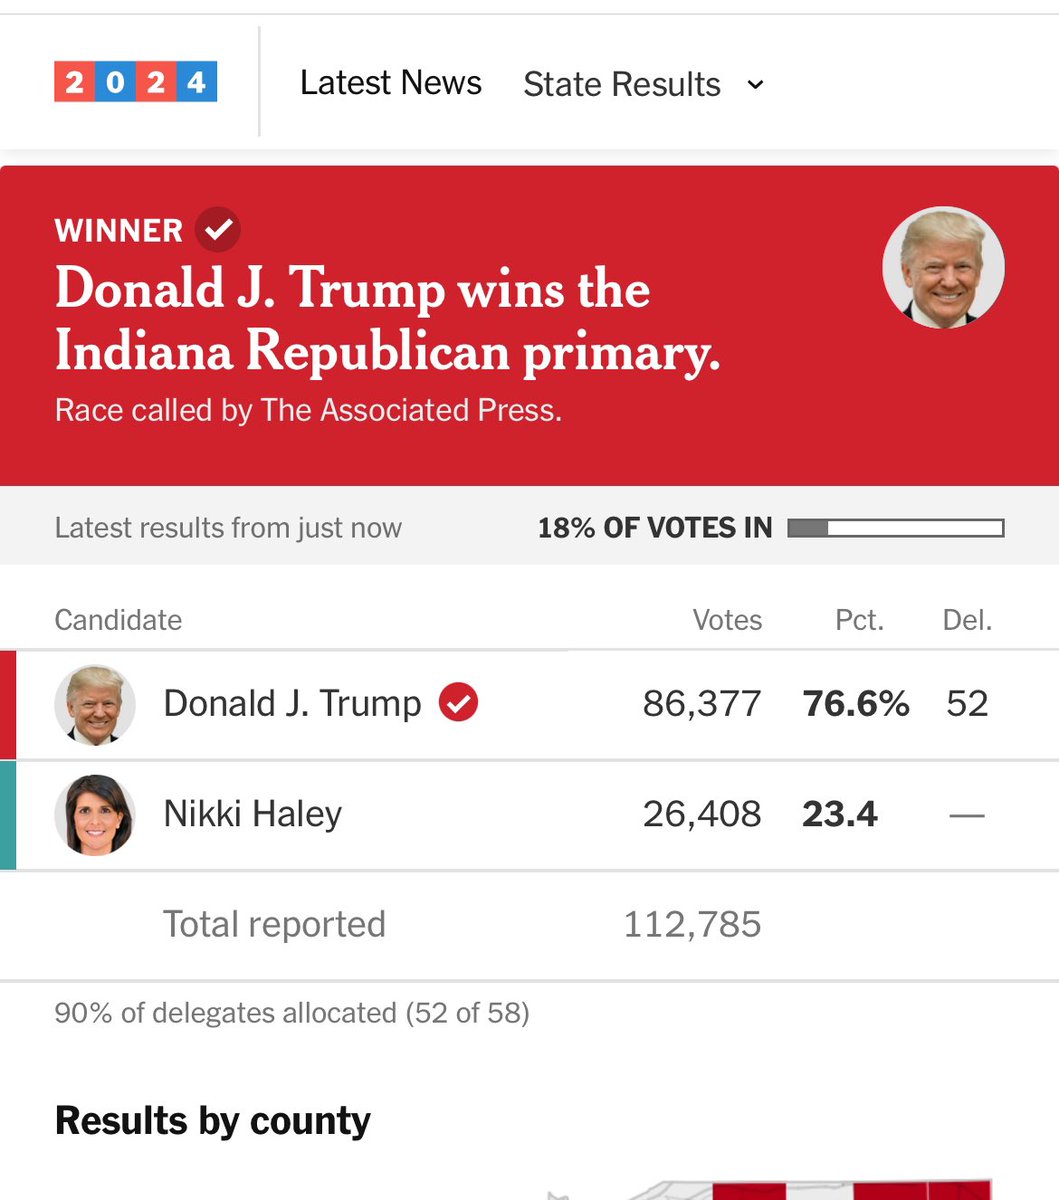 Over 100,000 Indiana votes are in and Trump is losing nearly one quarter of the Republican primary vote to Nikki Haley, who dropped out over two months ago.

This is devastating for him.